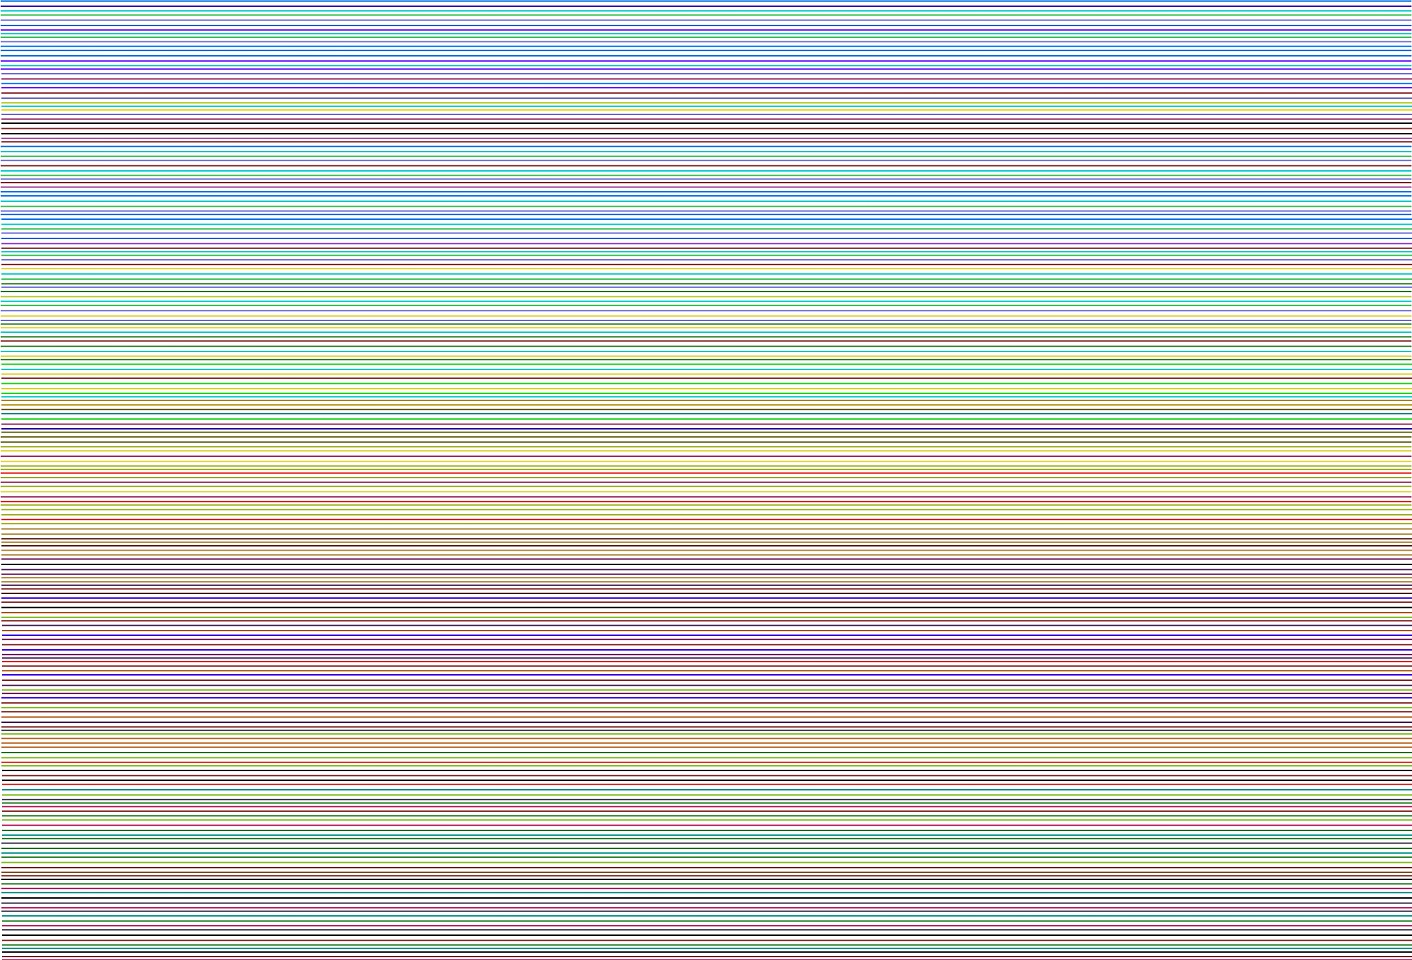 Dane Albert, Color Sticks #13, 2023
Acrylic on canvas (Concept), 48 x 72 in. (121.9 x 182.9 cm)
Series of colored lines and shapes in multiple configurations
DA.2023.sticks-013